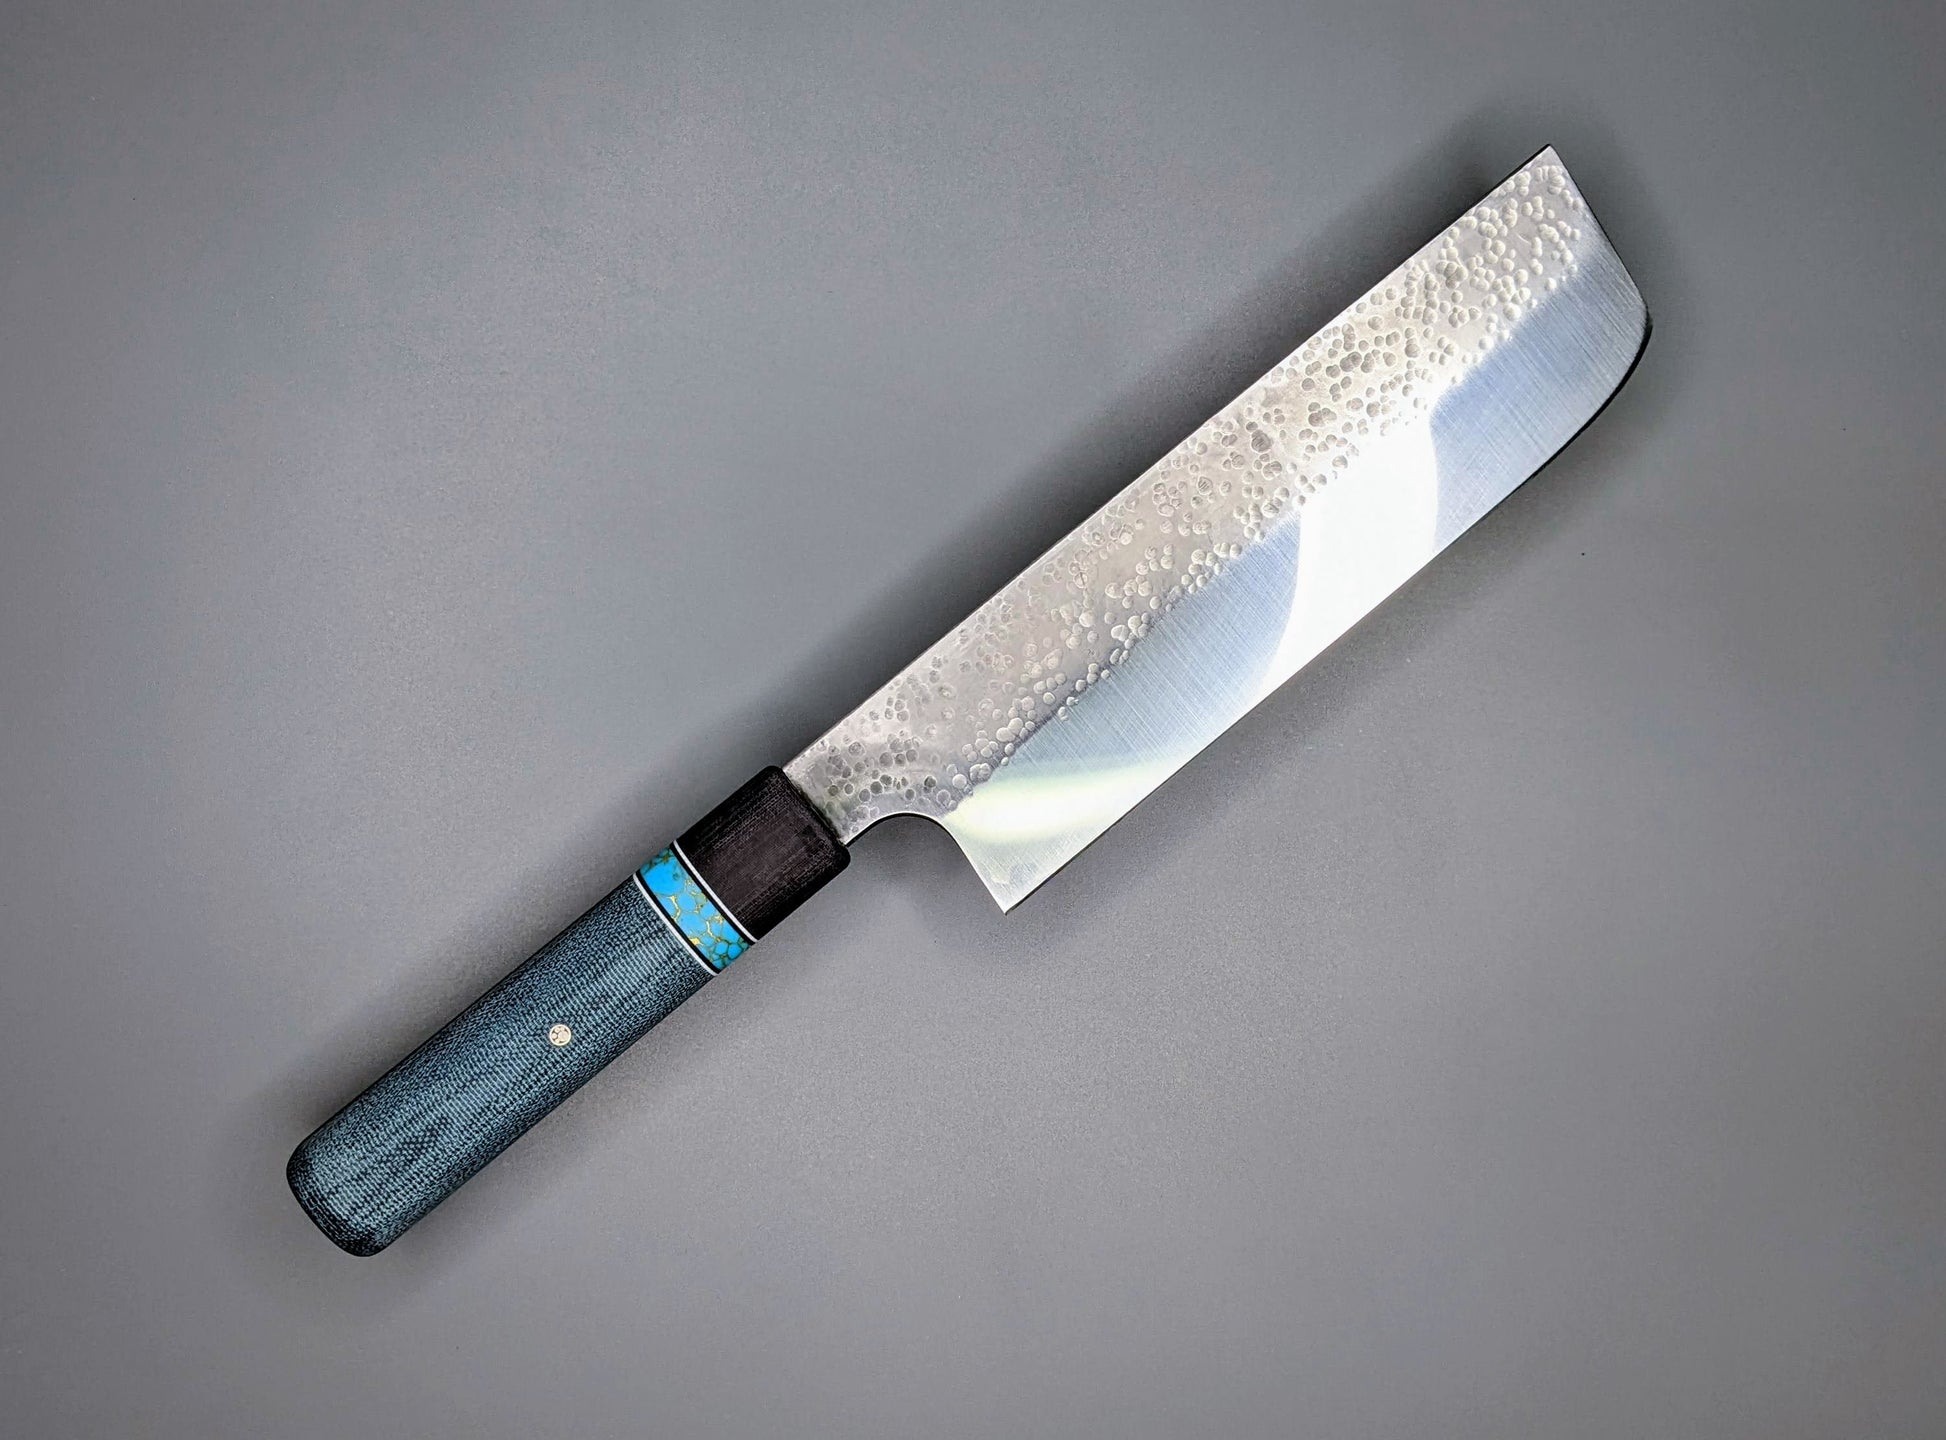 Japanese style Nakiri with a thick spine and blue handle on a gray background.